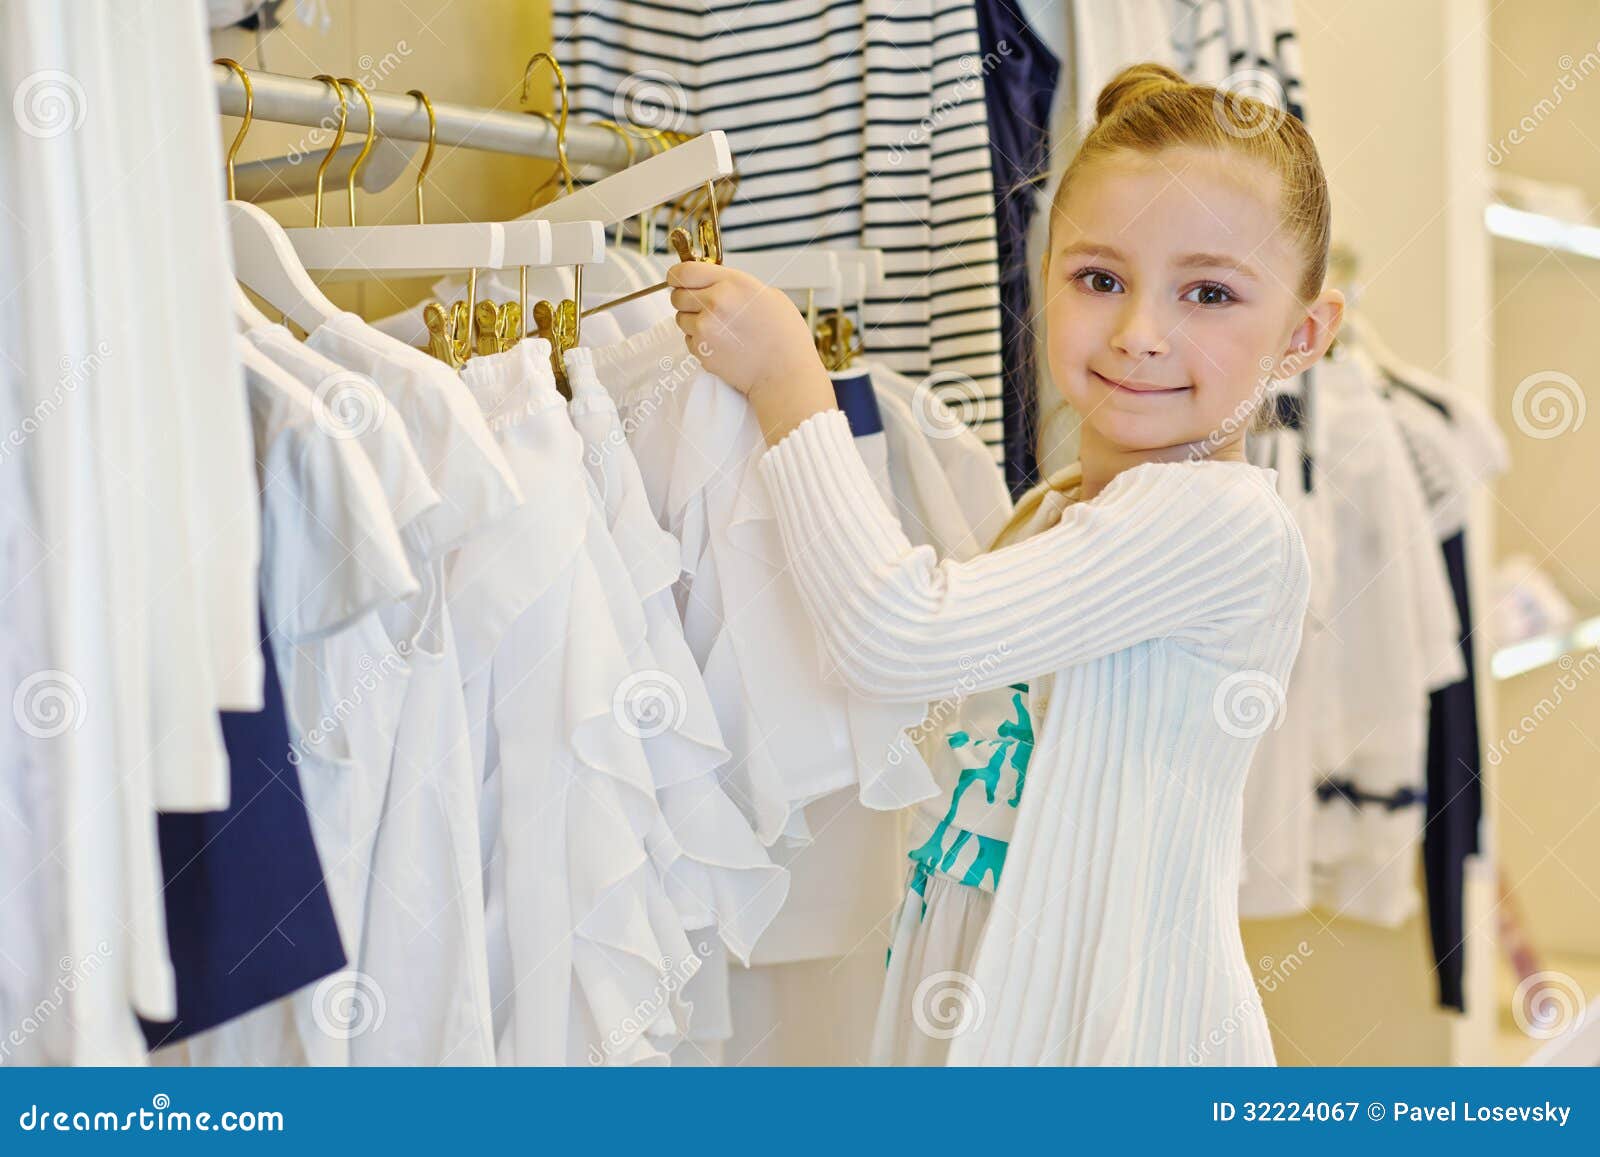 Little Girl Takes Hanger with Skirt from Stand Stock Image - Image of ...